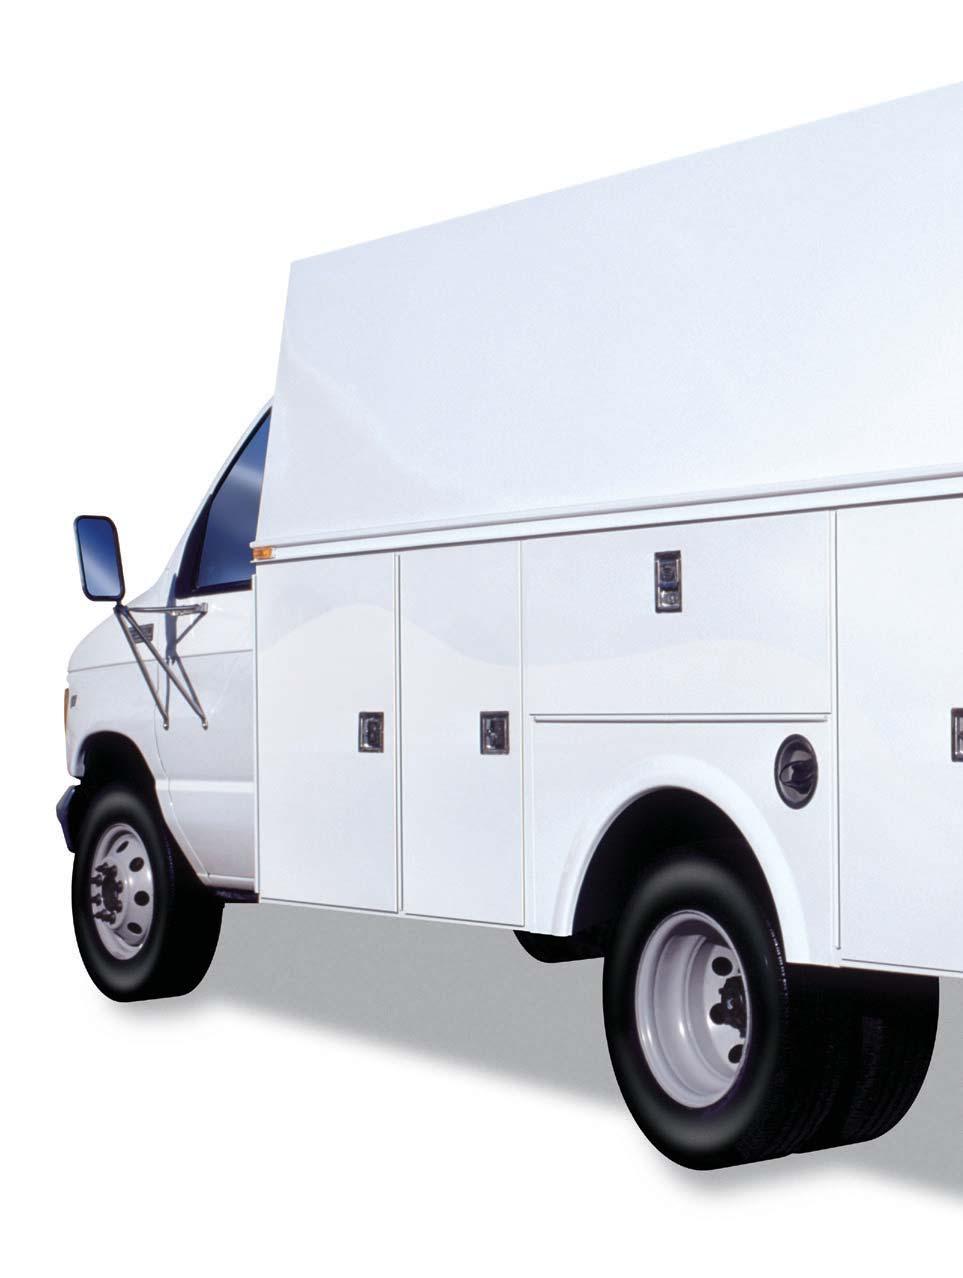 Omaha Standard PALFINGER OSV - Omaha Service Vehicle For questions or to place an order,